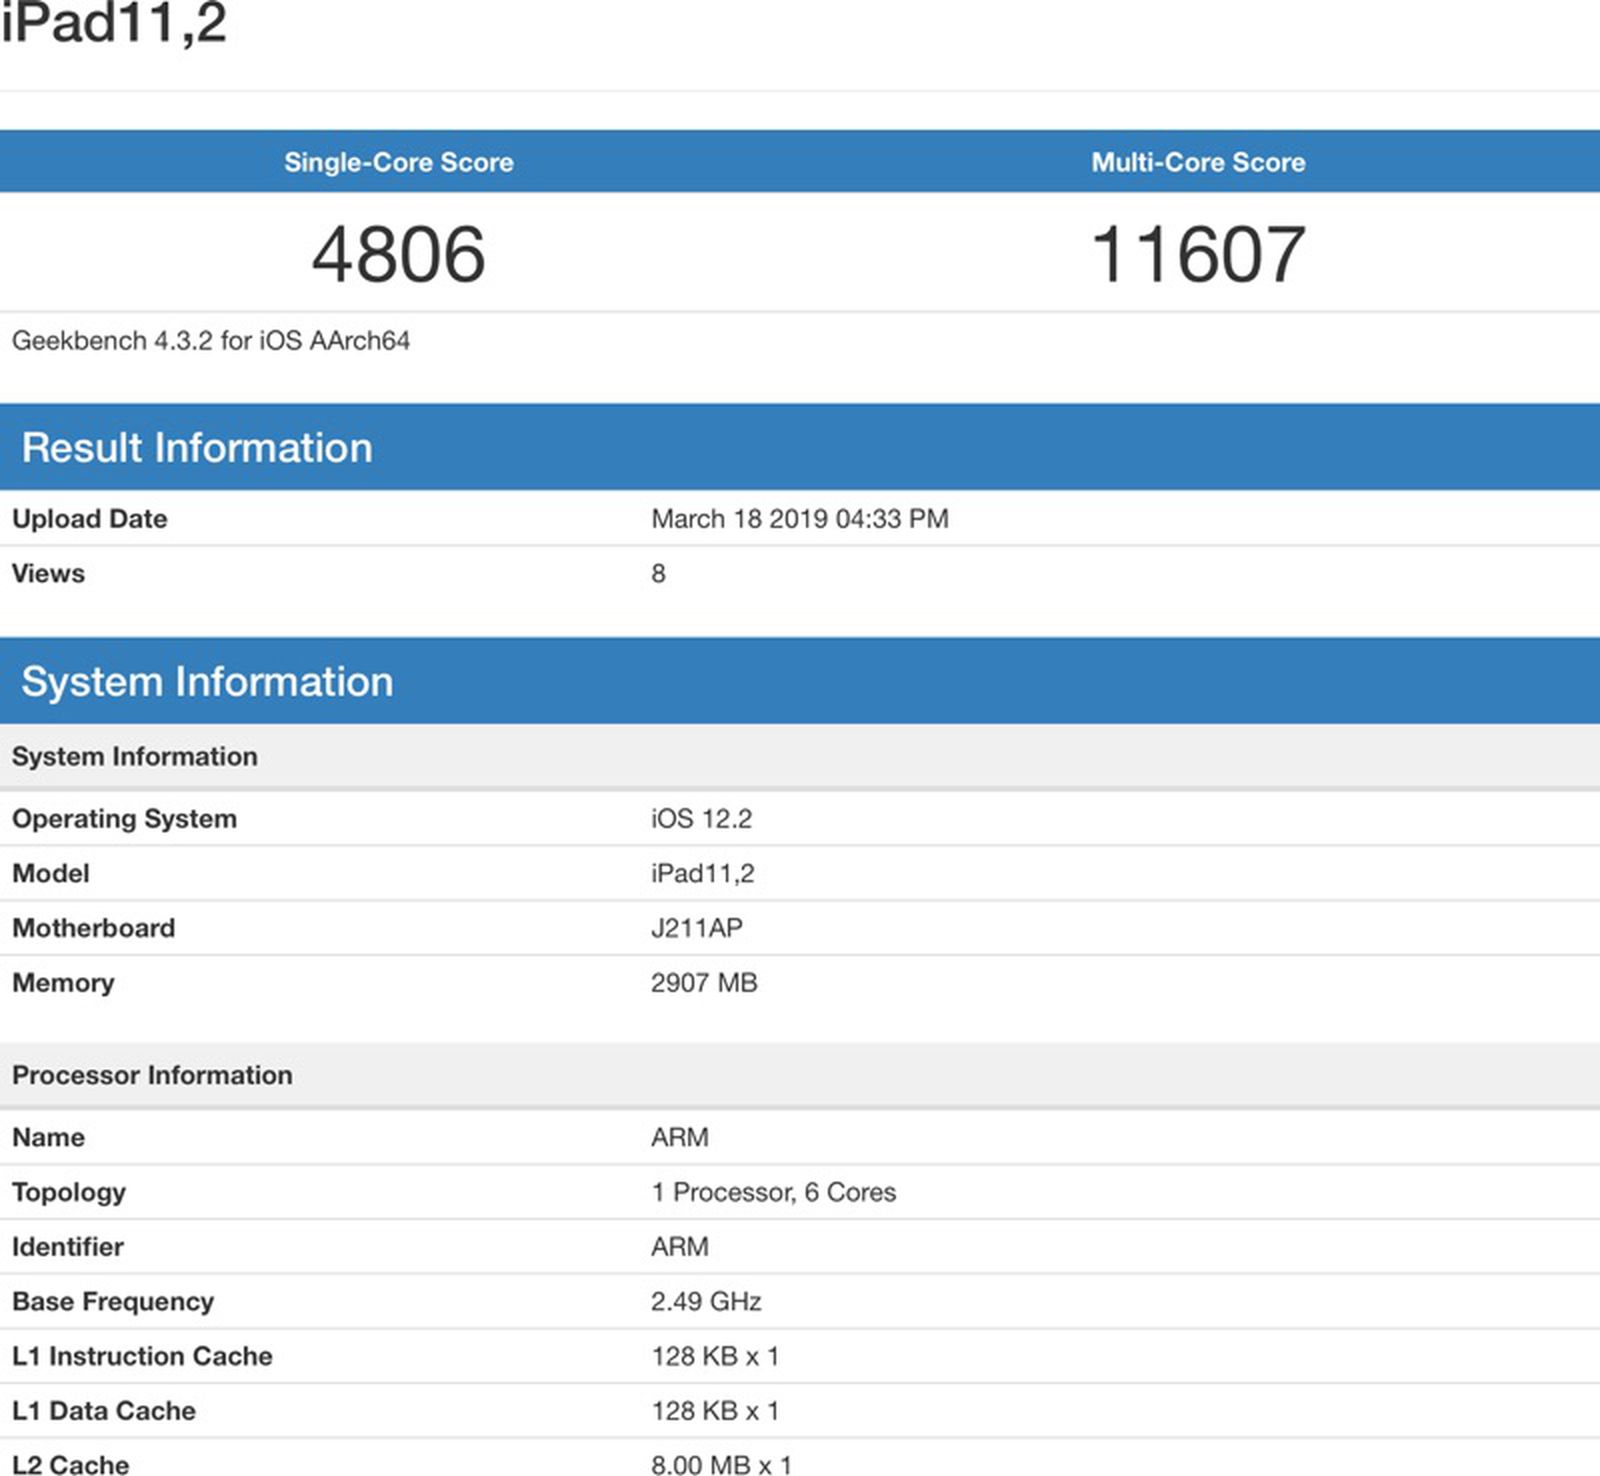 A12 Bionic in iPad Paired 3GB RAM, Clocks at Same as Latest iPhones - MacRumors